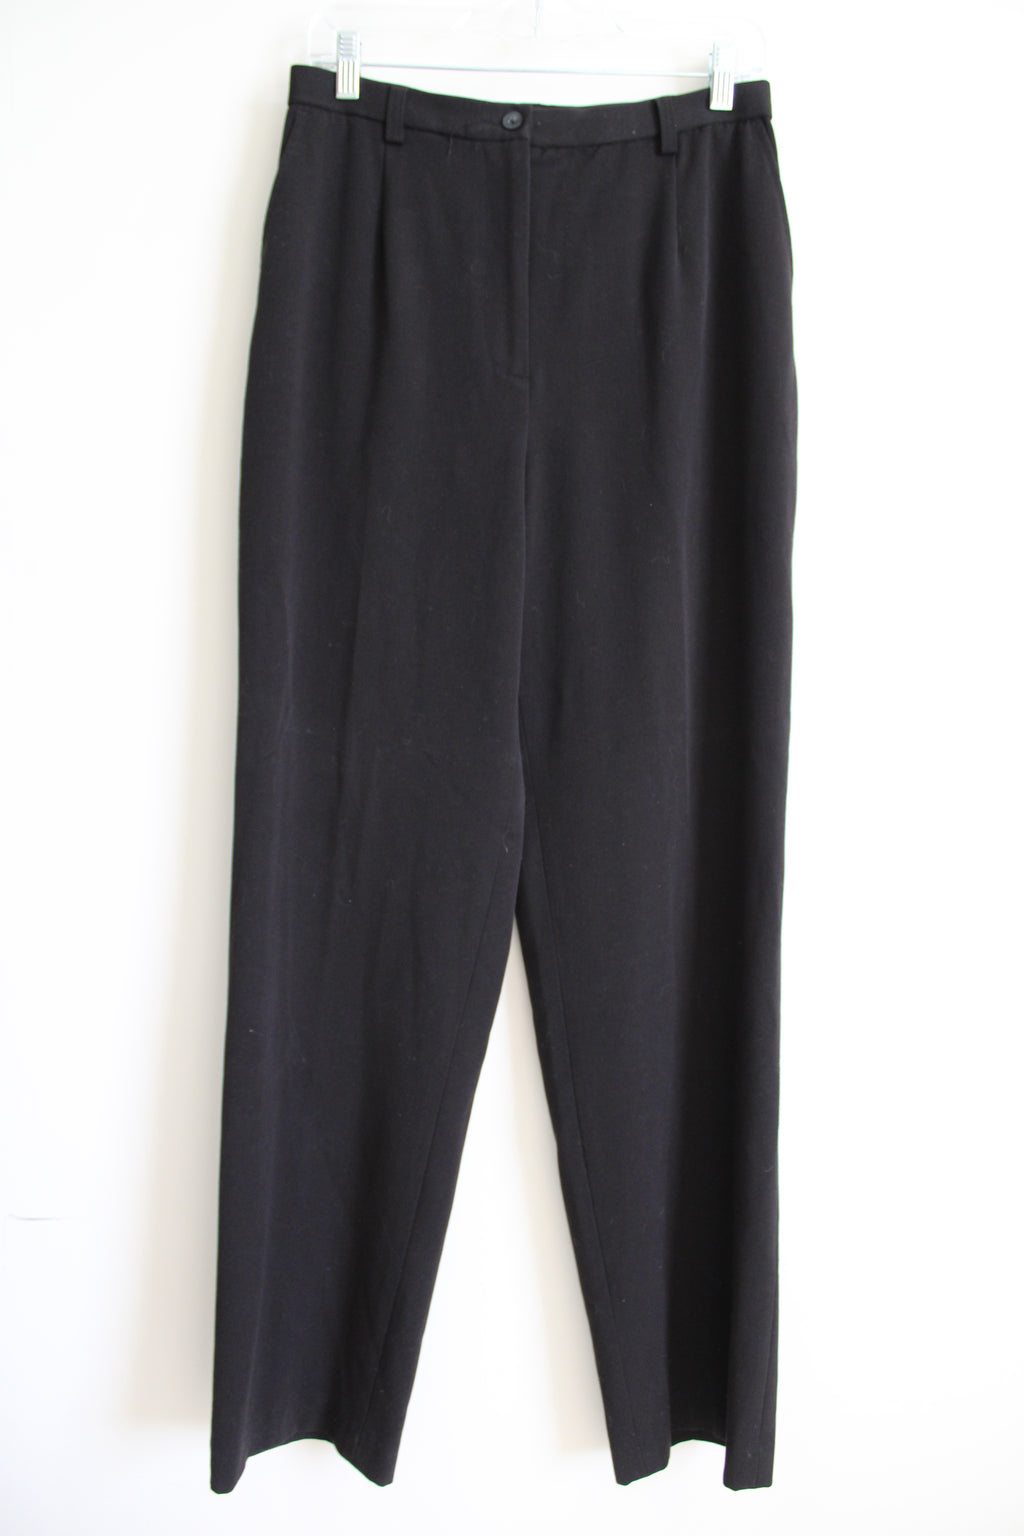 Dialogue Black Trousers | 10 Tall